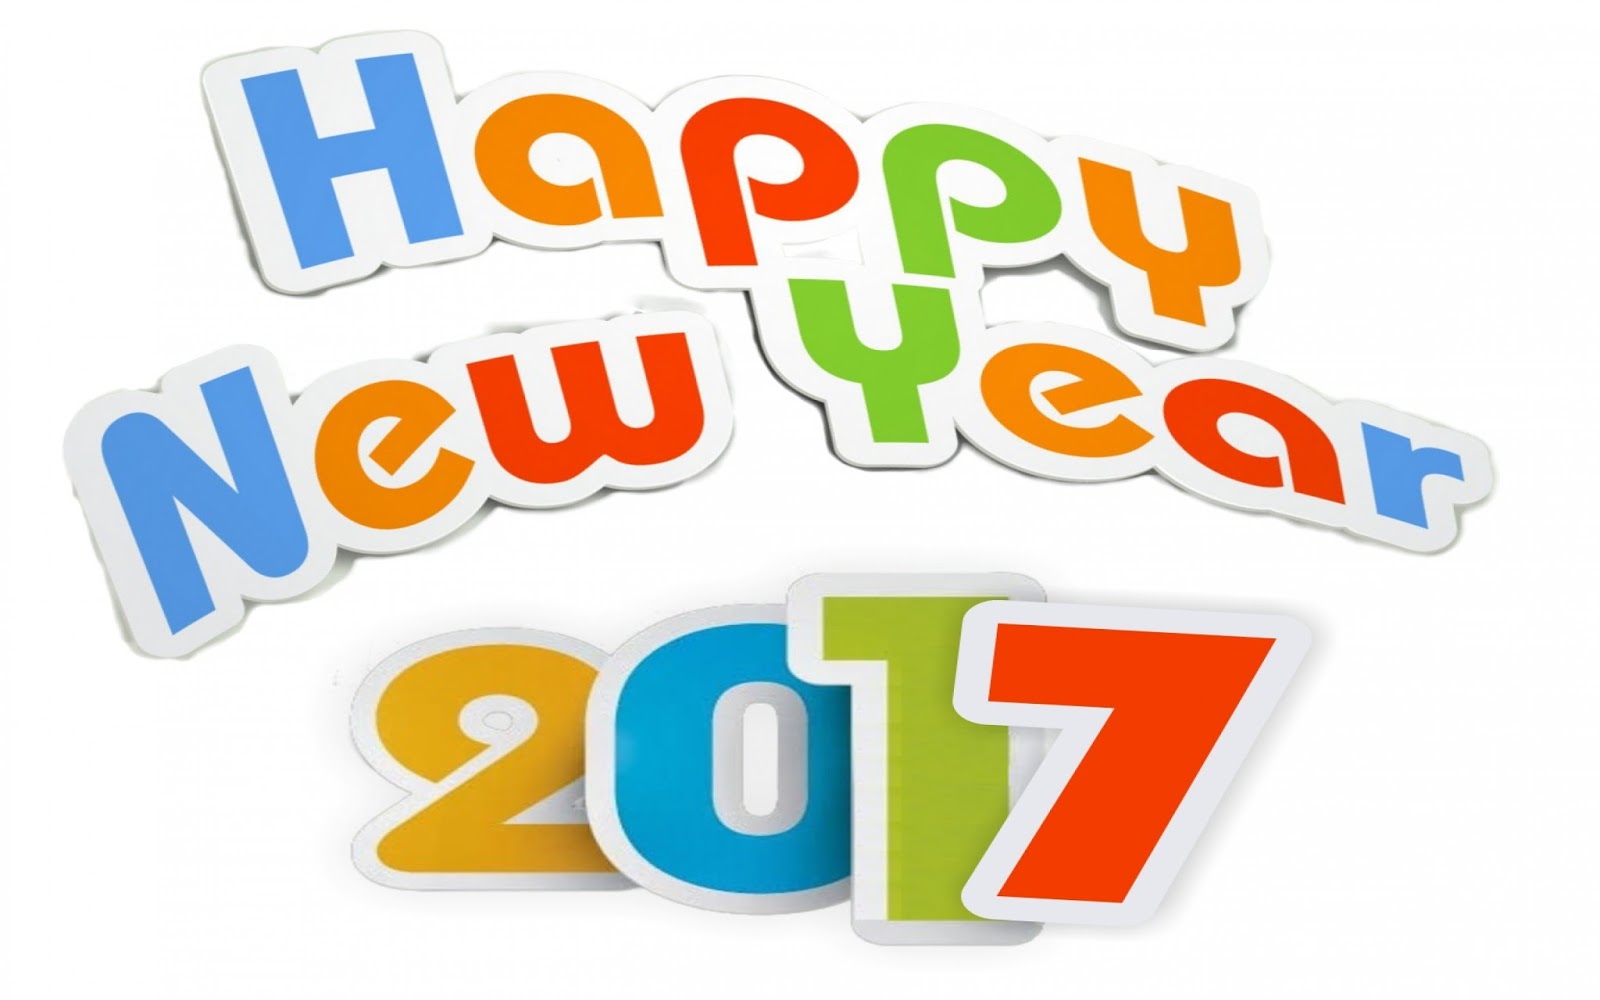 2017 clipart new year's. Happy year free download